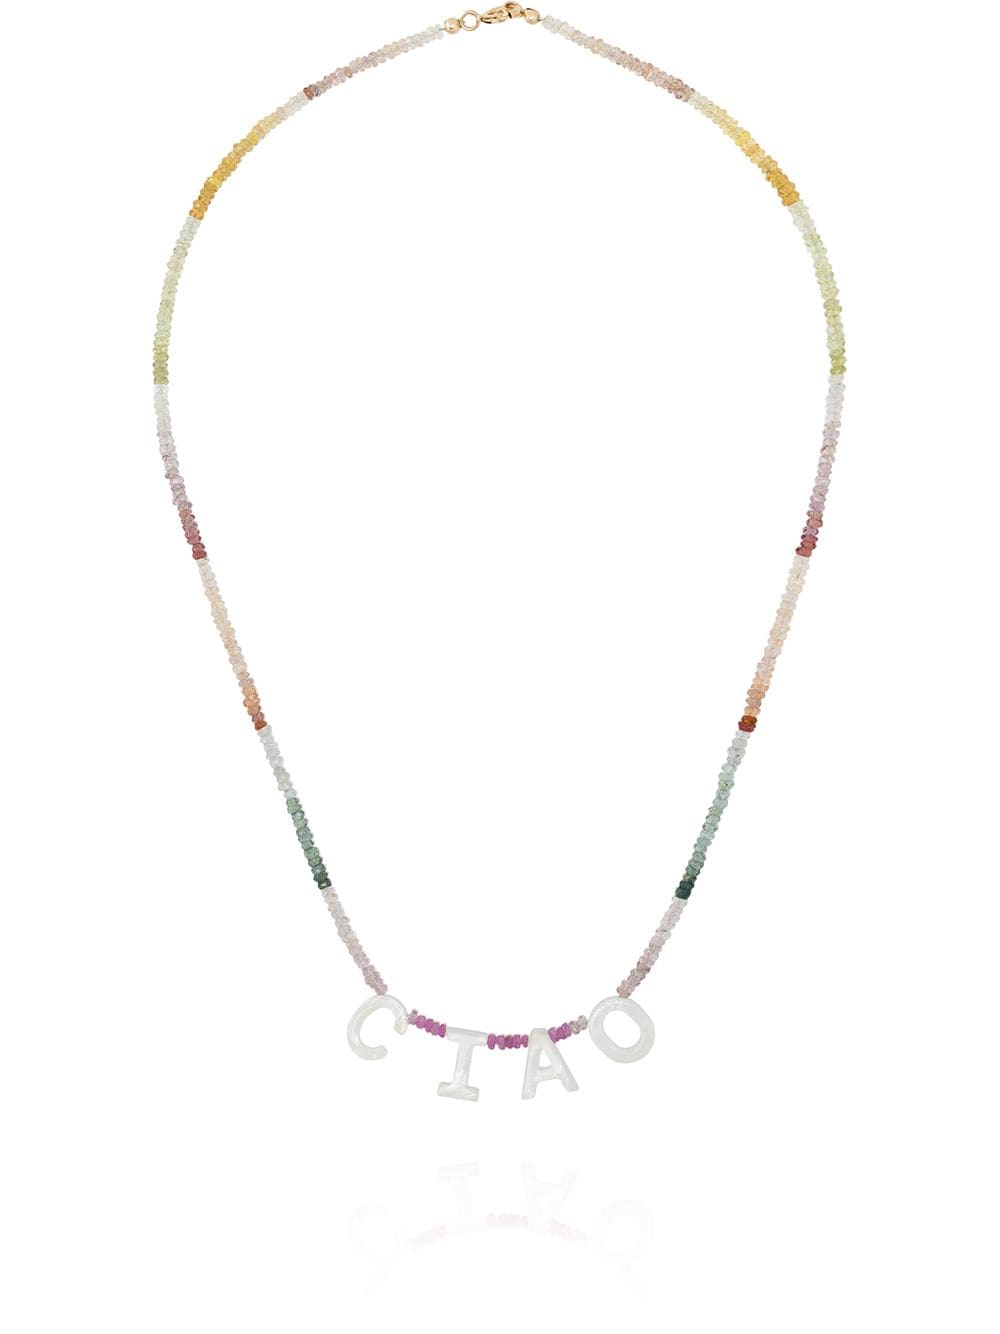 Ciao rainbow-sapphire necklace